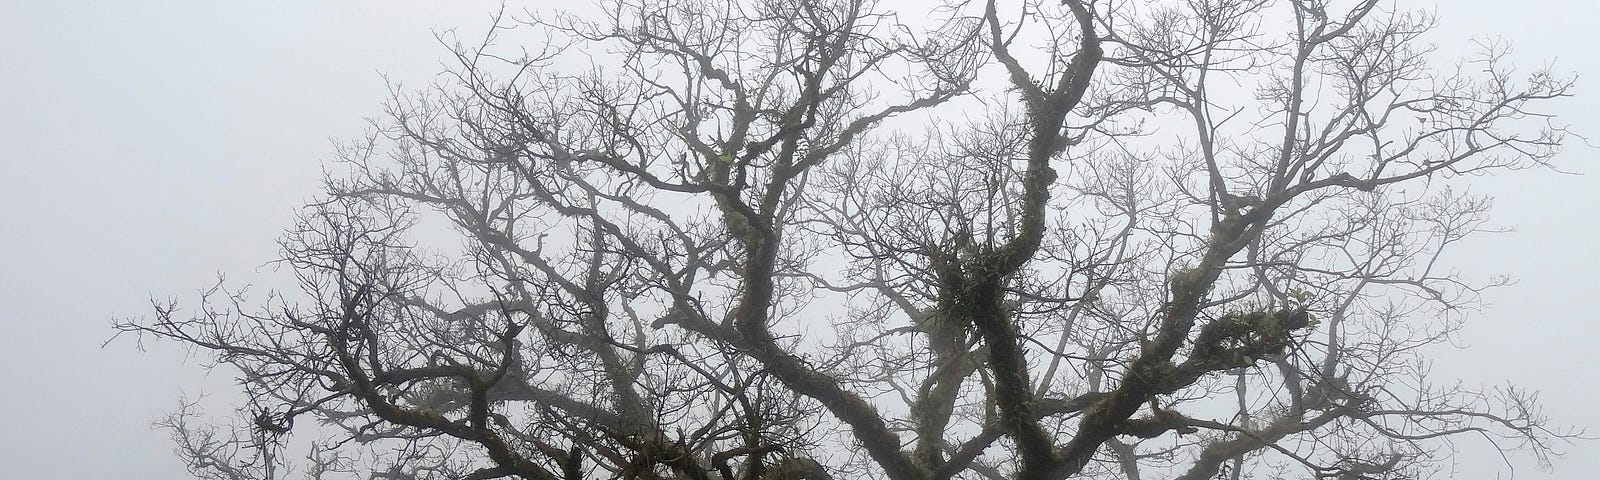 tree with no leaves in fog